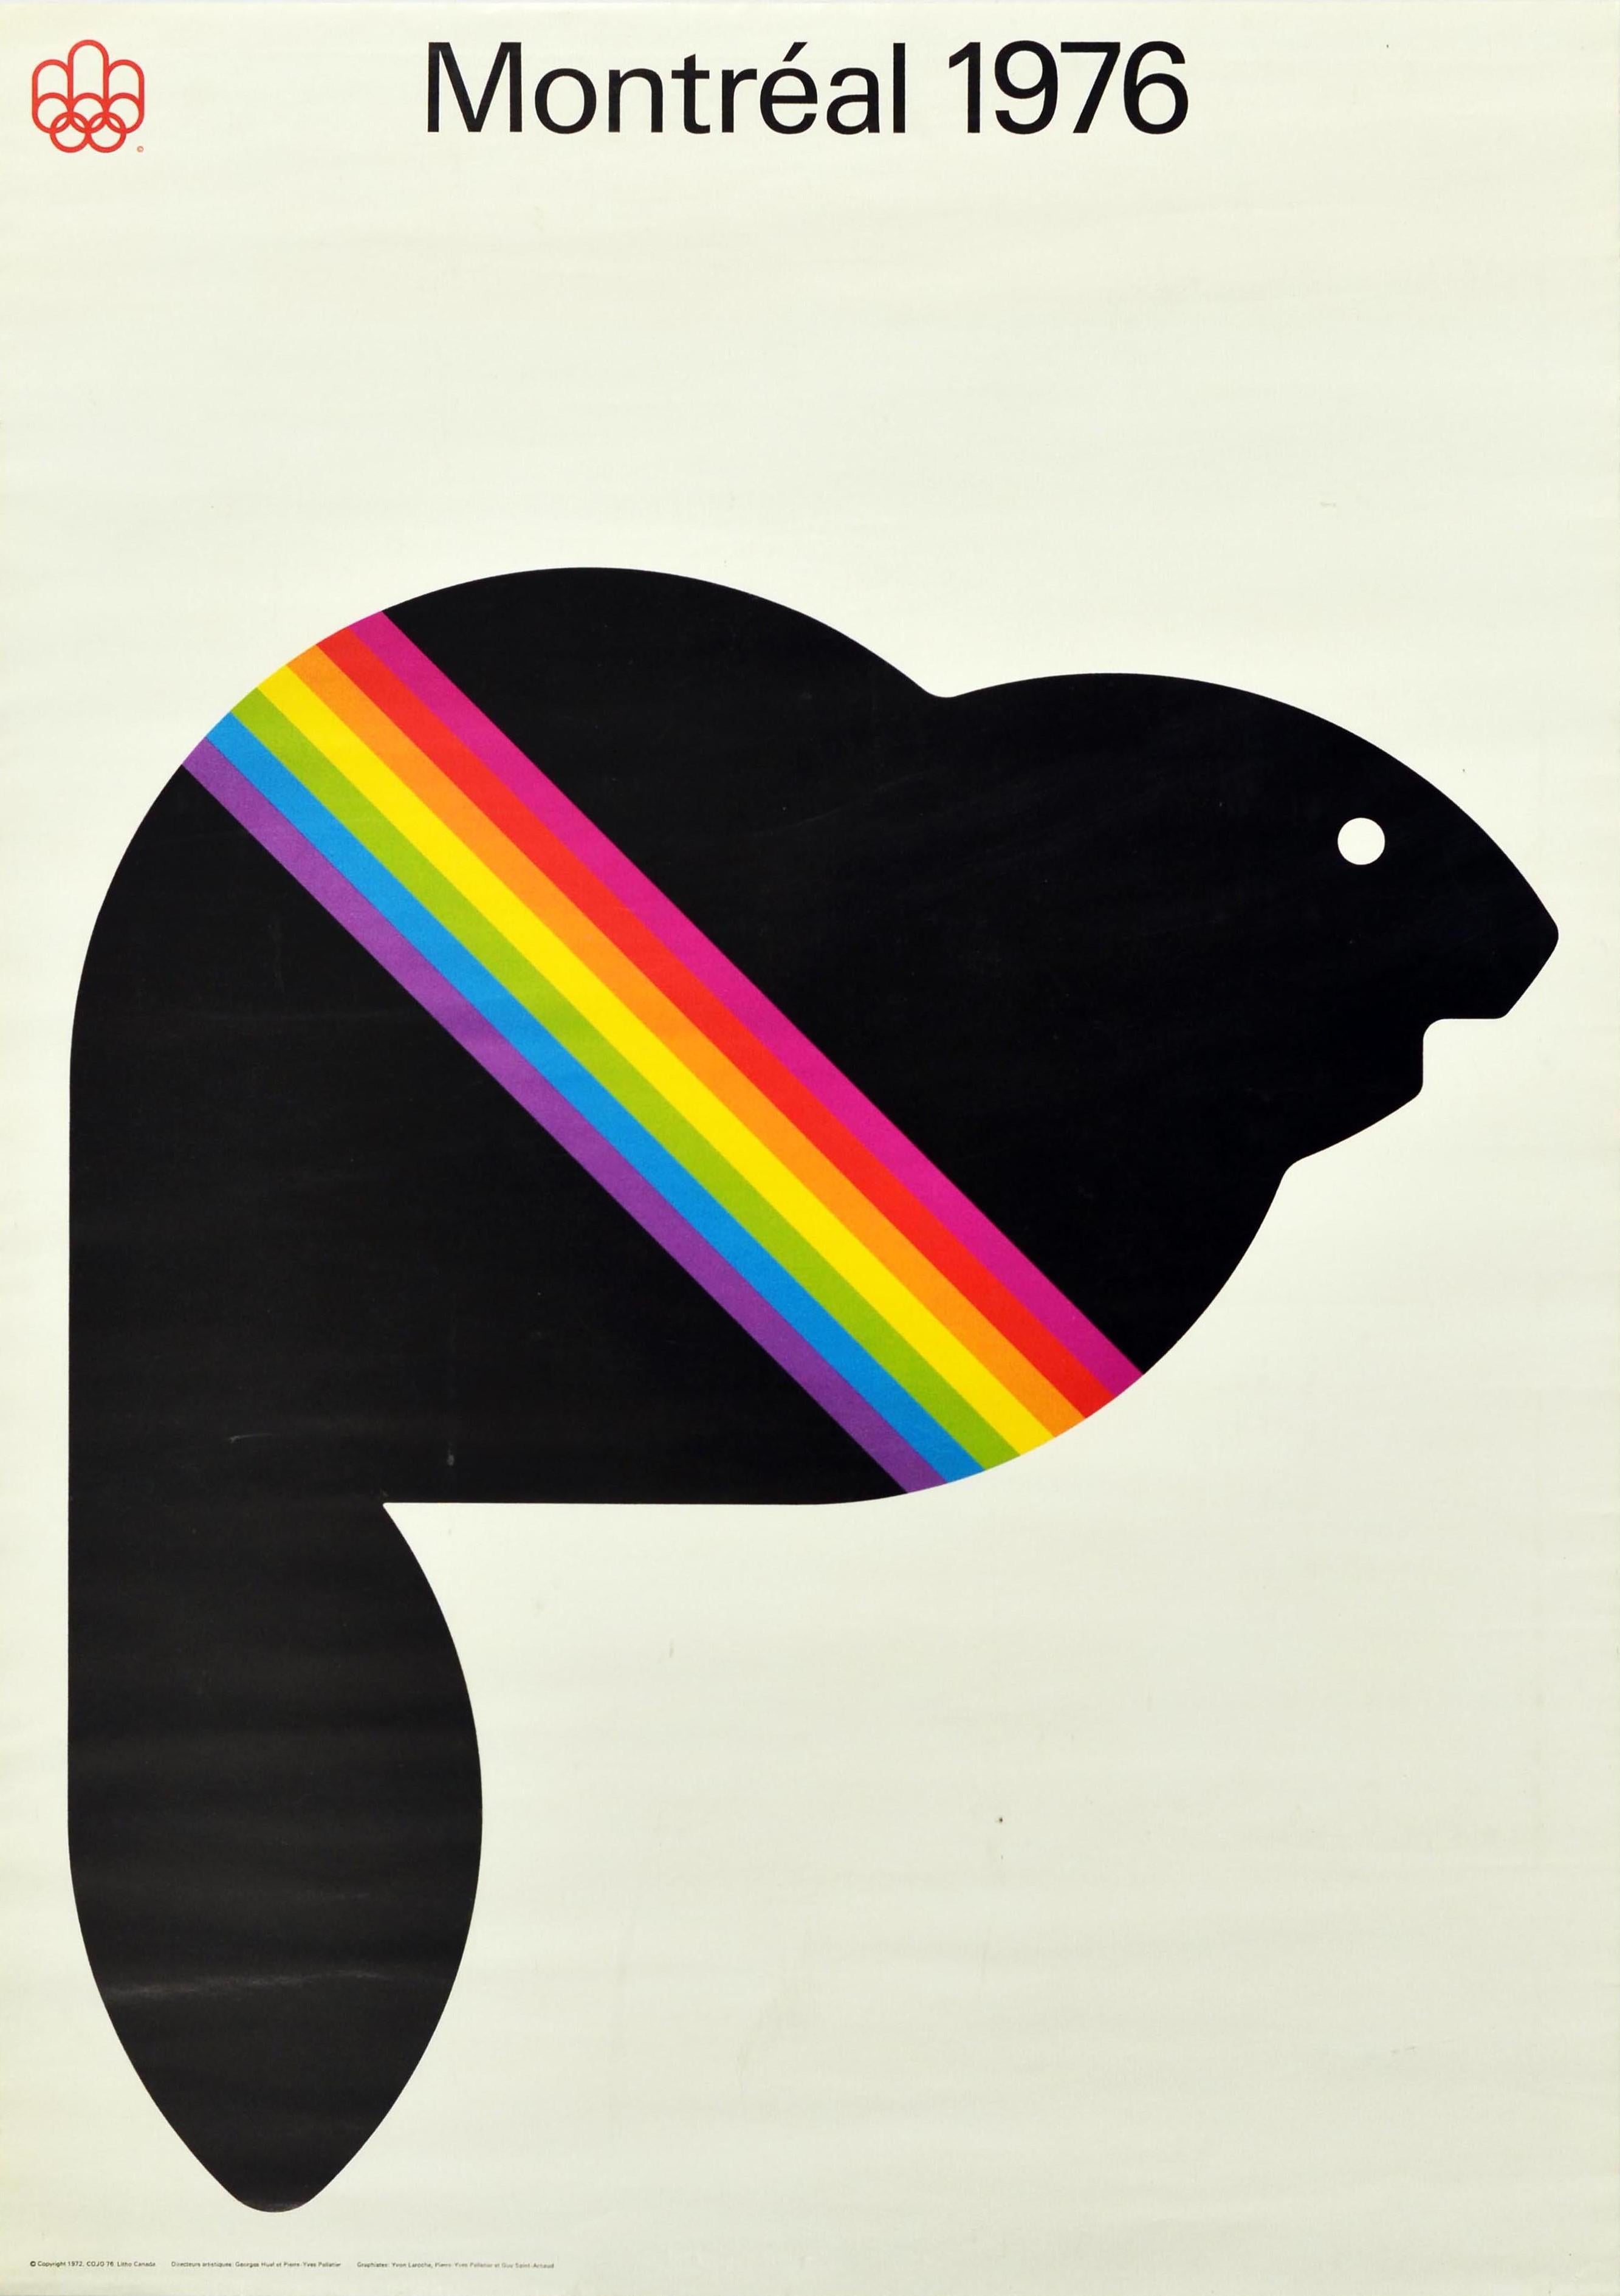 Original vintage sports advertising poster for the XXI Olympic Summer Games 1976 held in Montreal Quebec Canada from 17 July to 1 August featuring an illustration by the graphic designer Ernst Roch (1928-2003) of a beaver - Canada's national animal